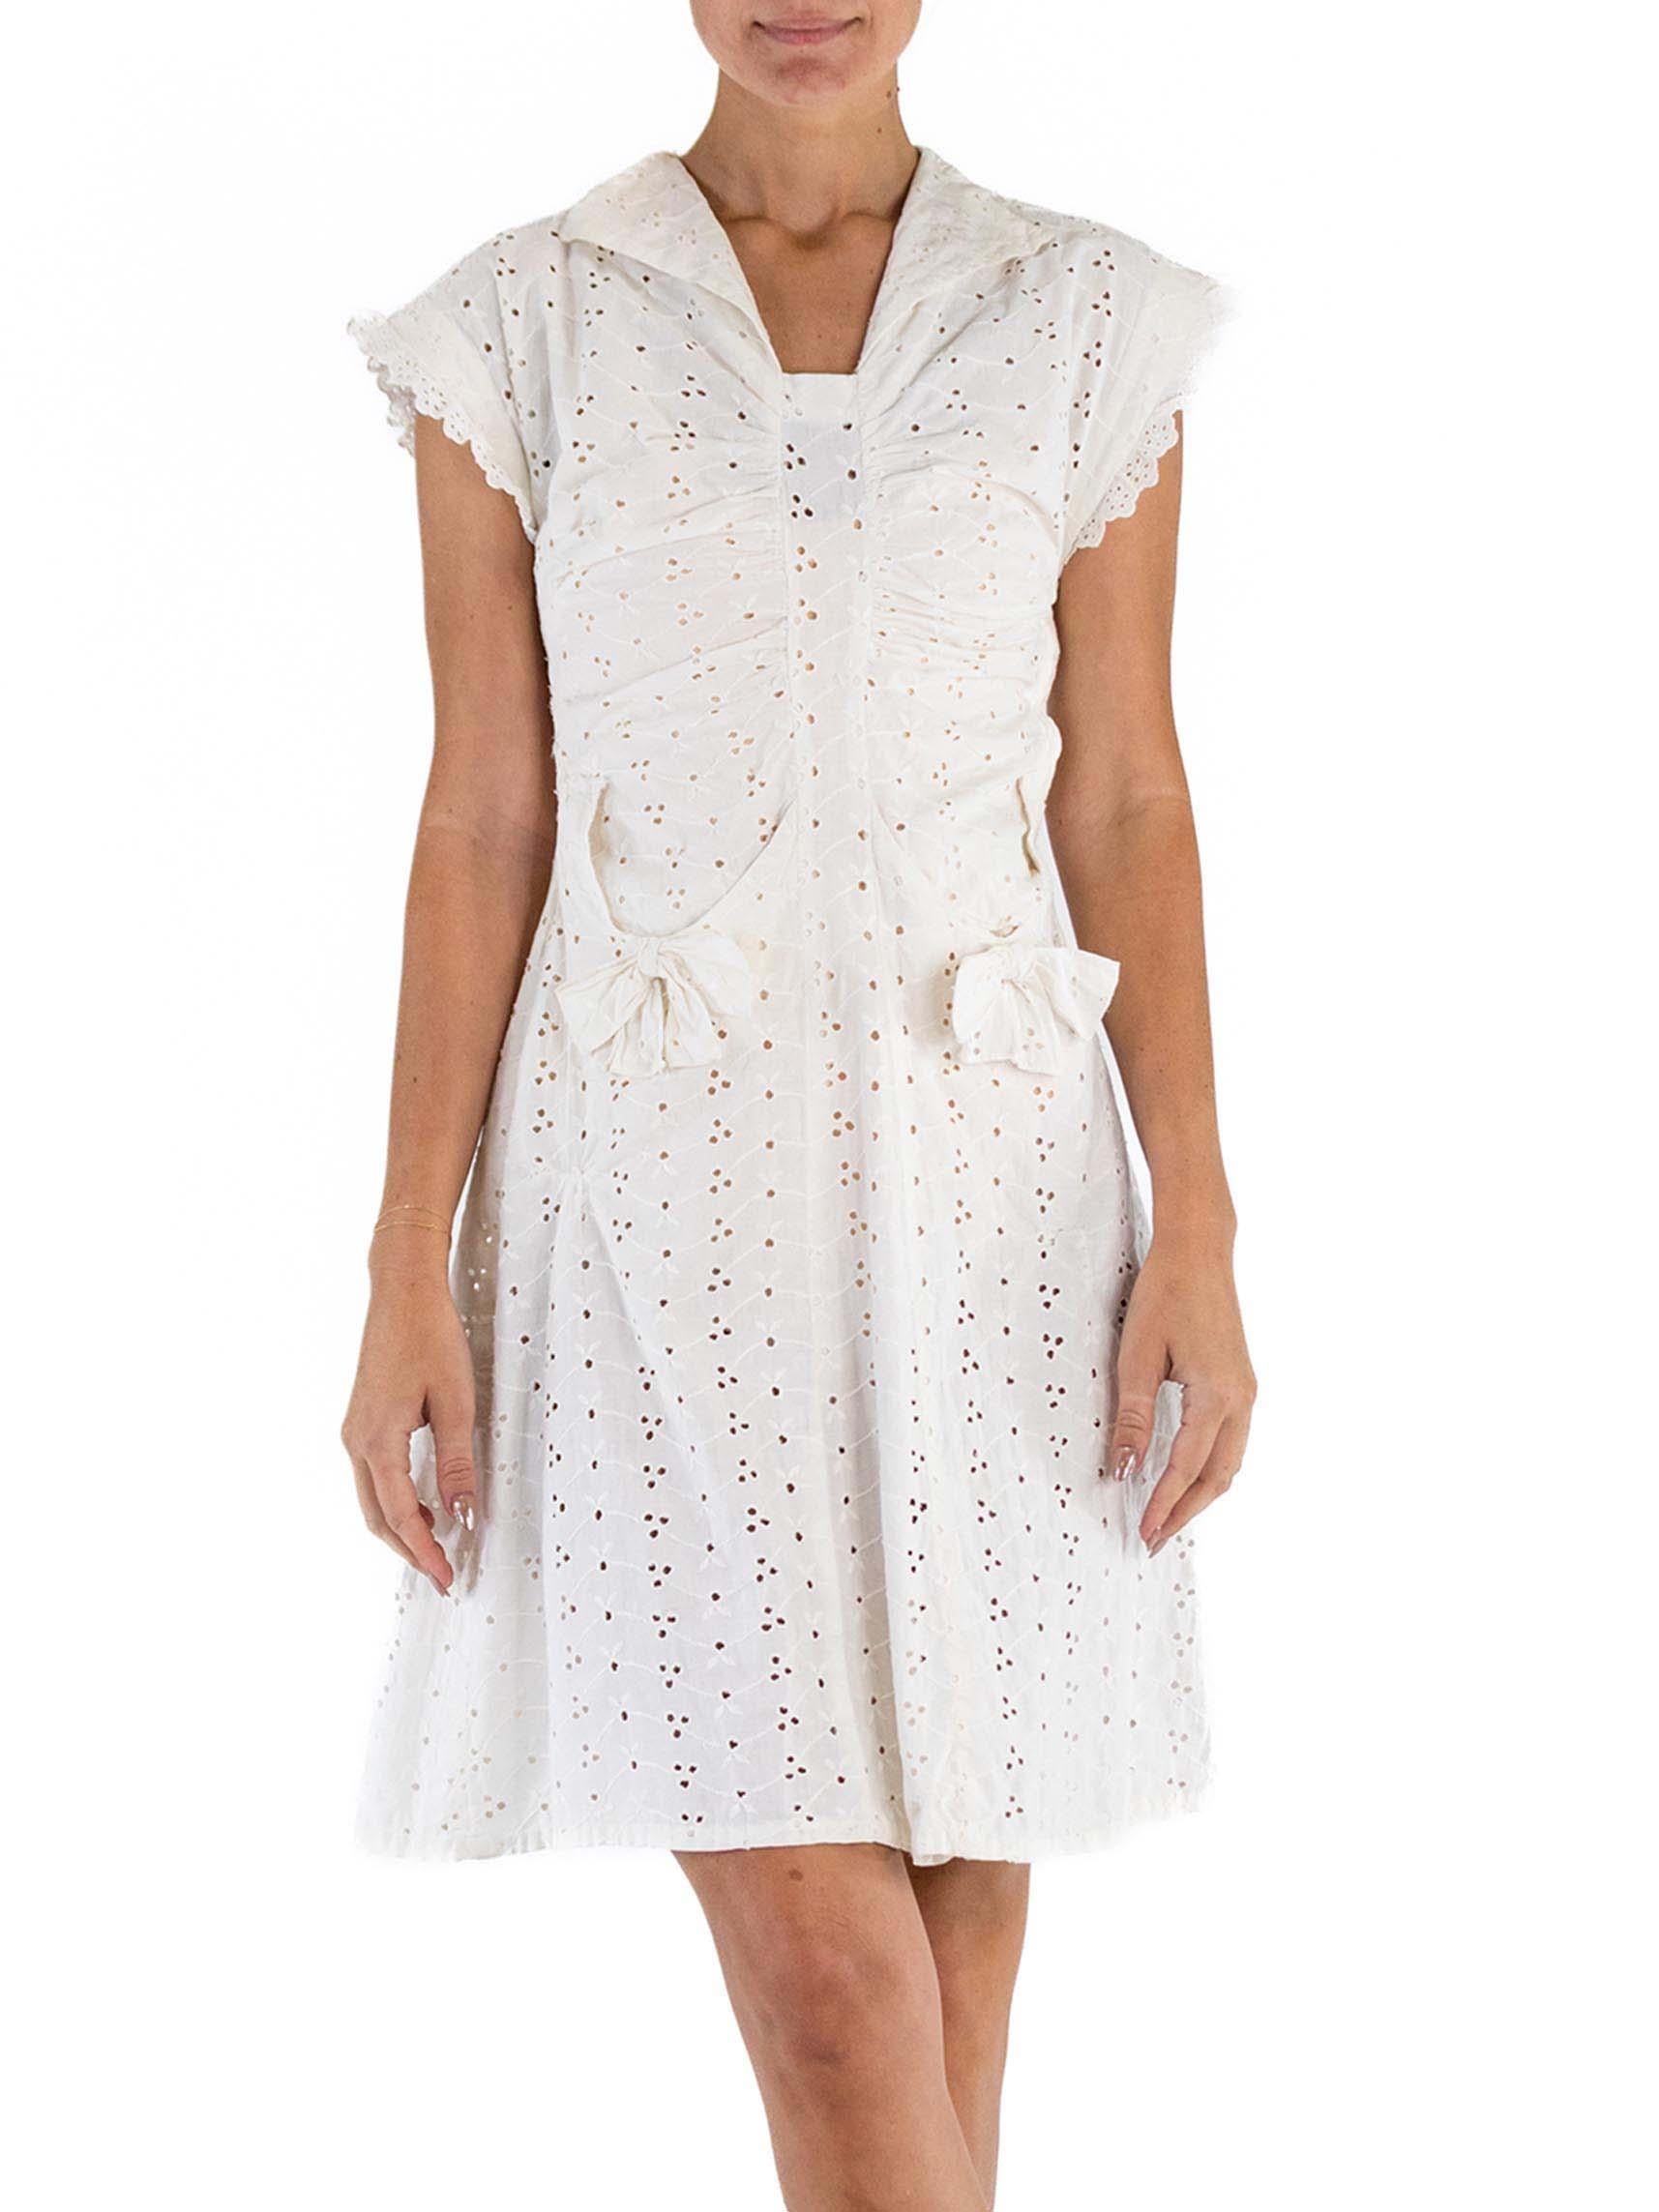 1930S White Cotton Eyelet Lace Cute Little Dress With Bow Pockets For Sale 5